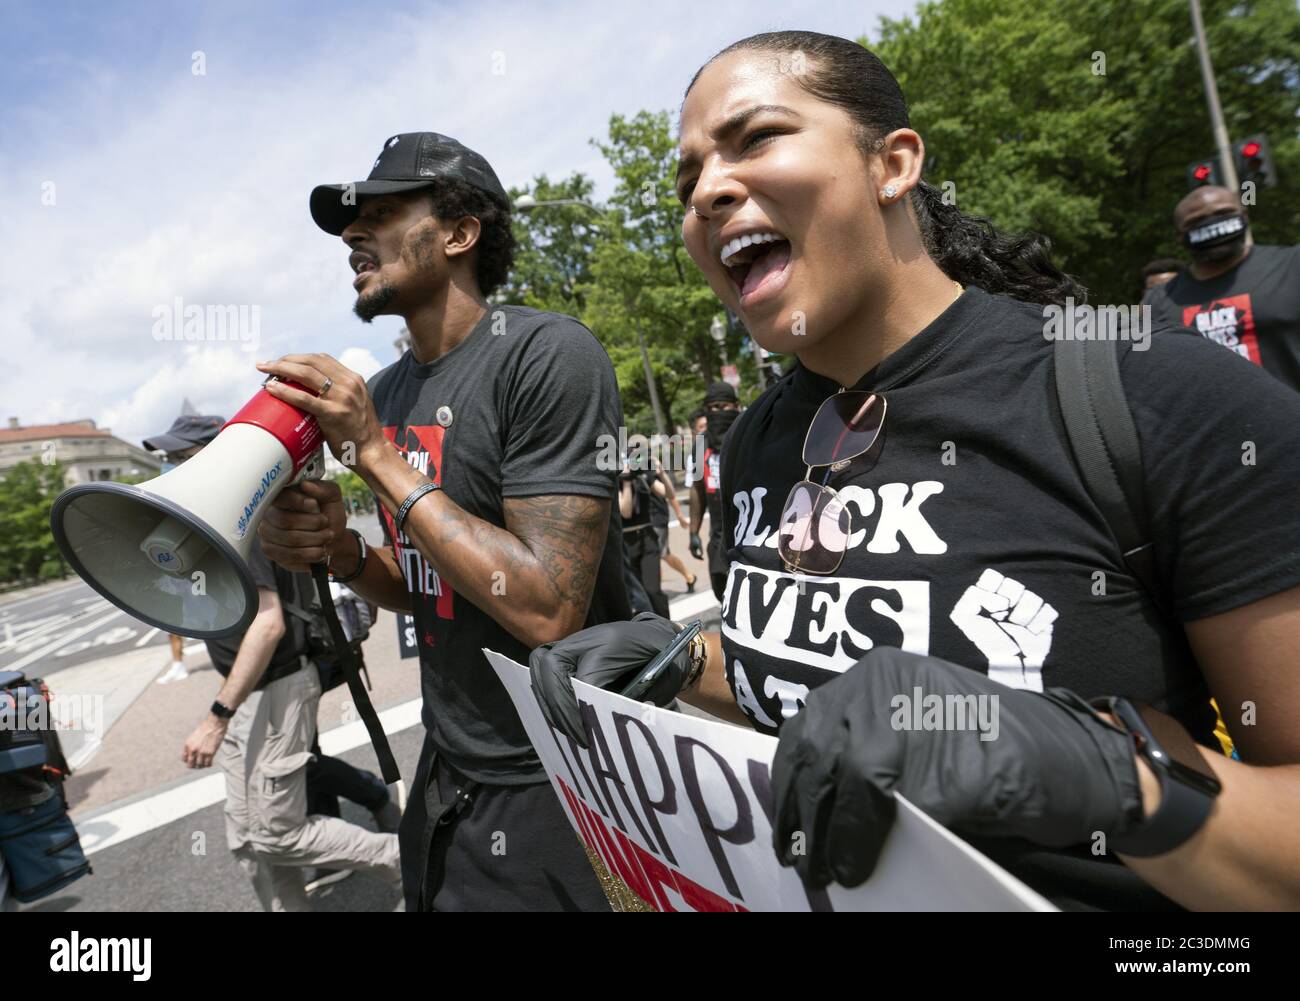 Washington, United States. 19th June, 2020. Washington Wizards' Bradley Beal and Washington Mystics Natasha Cloud participate in a Juneteenth rally at the Martin Luther King Jr. Memorial on Friday, June 19, 2020 in Washington, DC. Juneteenth, or June 19th, marks the date of the end of slavery in the United States. Photo by Kevin Dietsch/UPI Credit: UPI/Alamy Live News Stock Photo